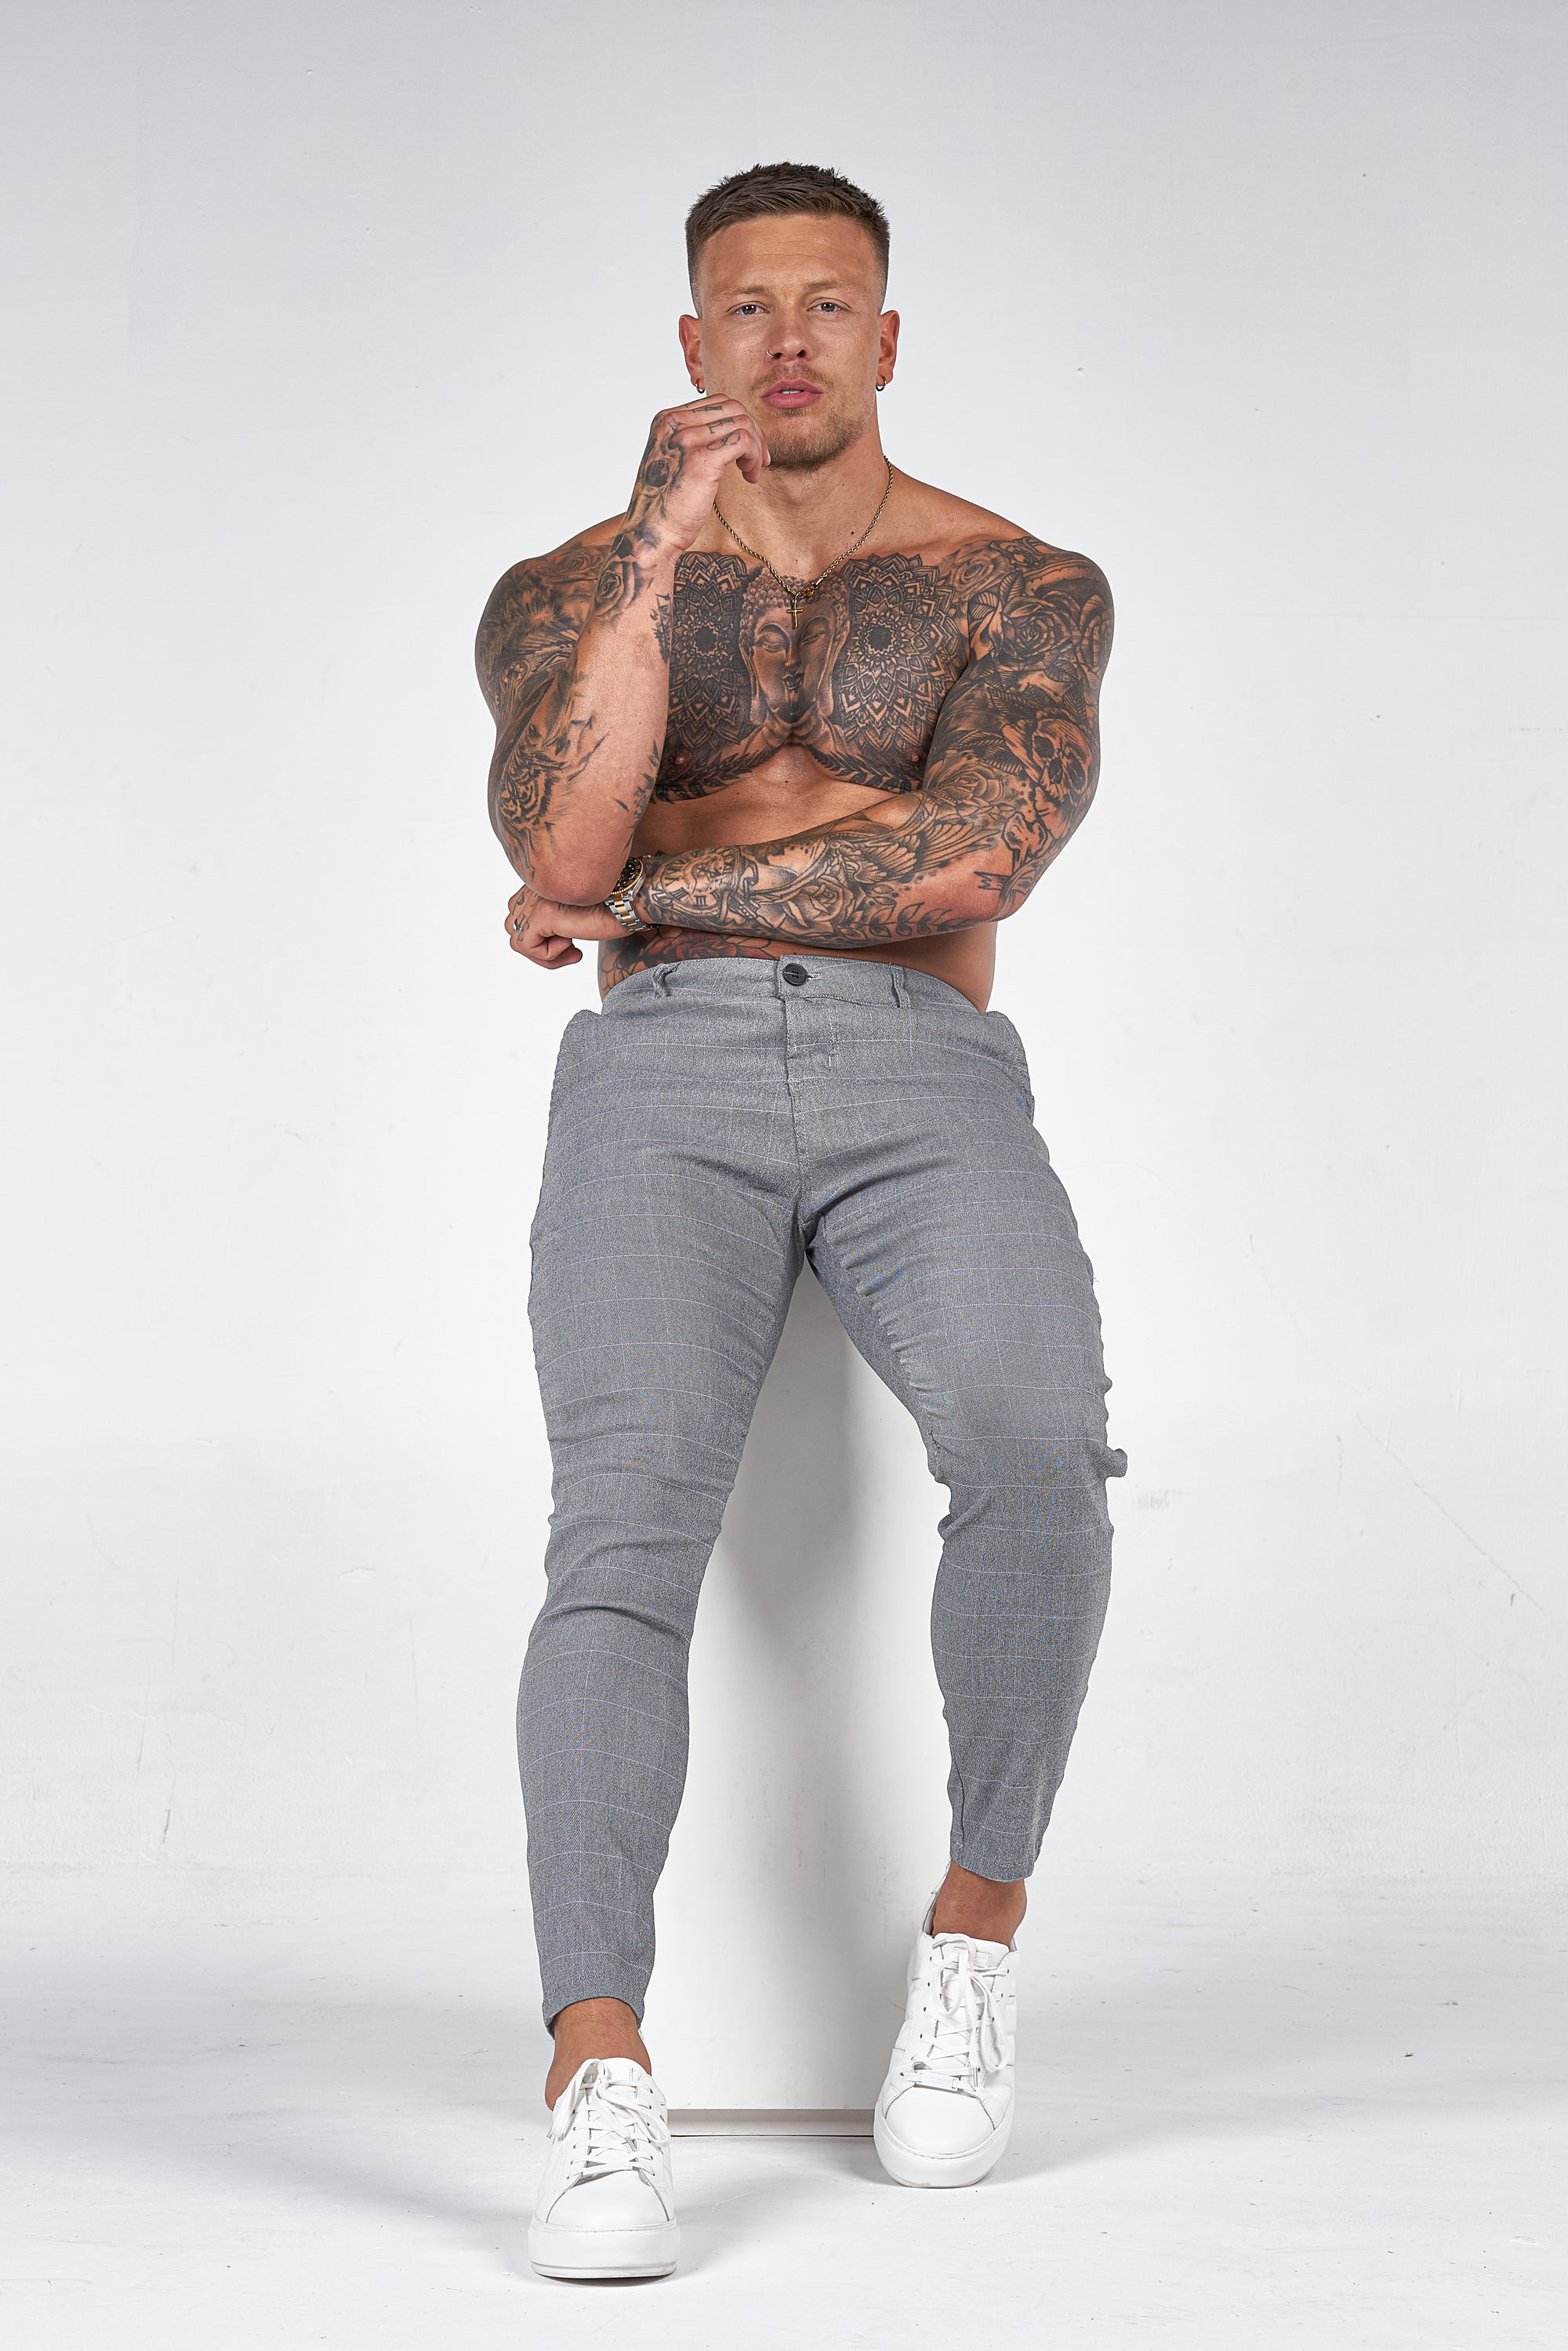 THE SIENA TROUSERS - GREY - ICON. AMSTERDAM